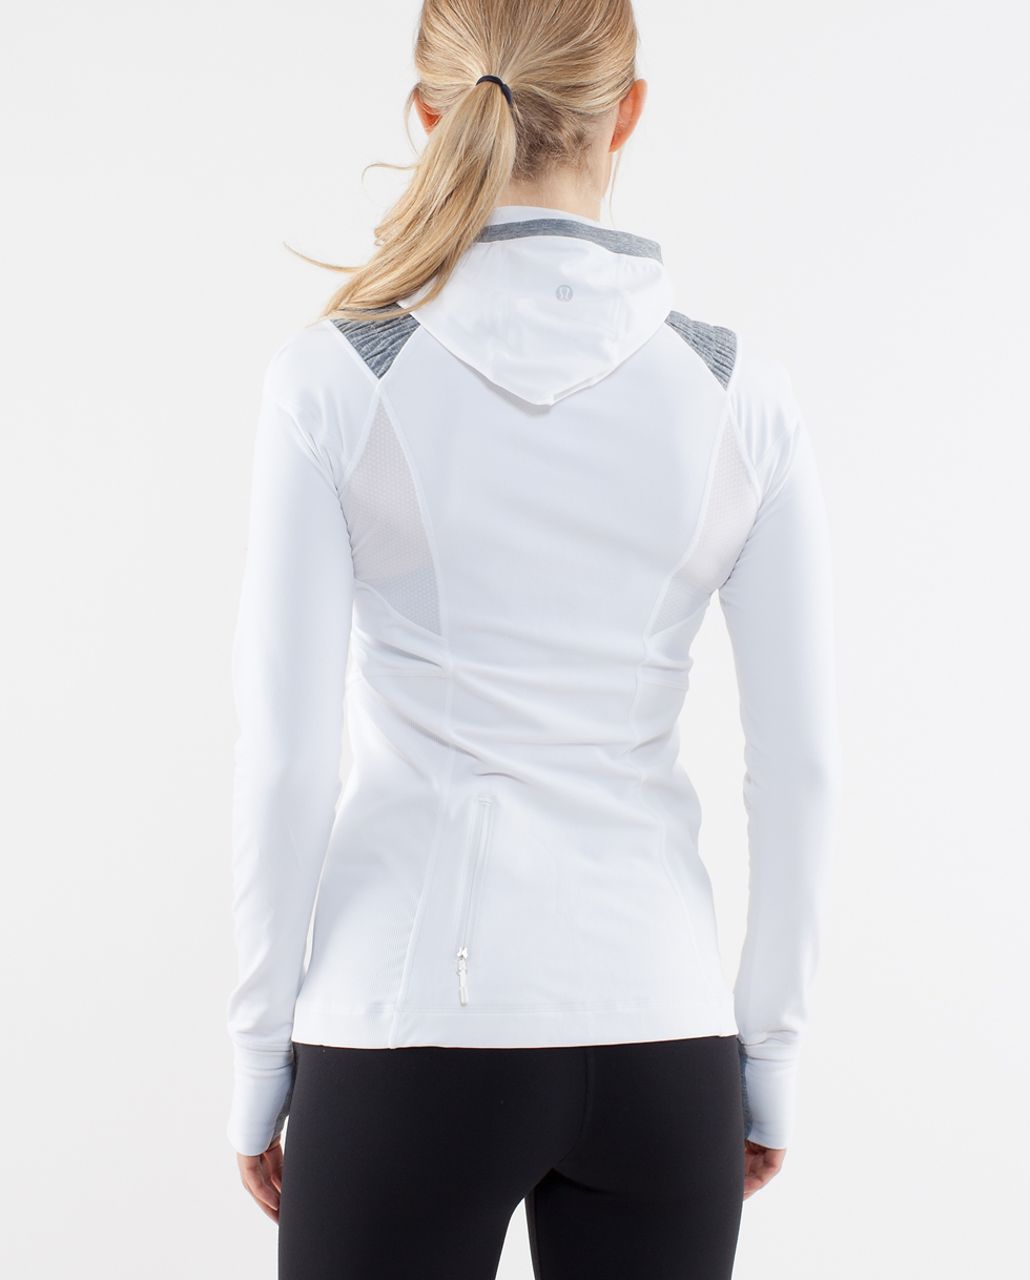 Lululemon Run:  For It Pullover - White /  Heathered Blurred Grey